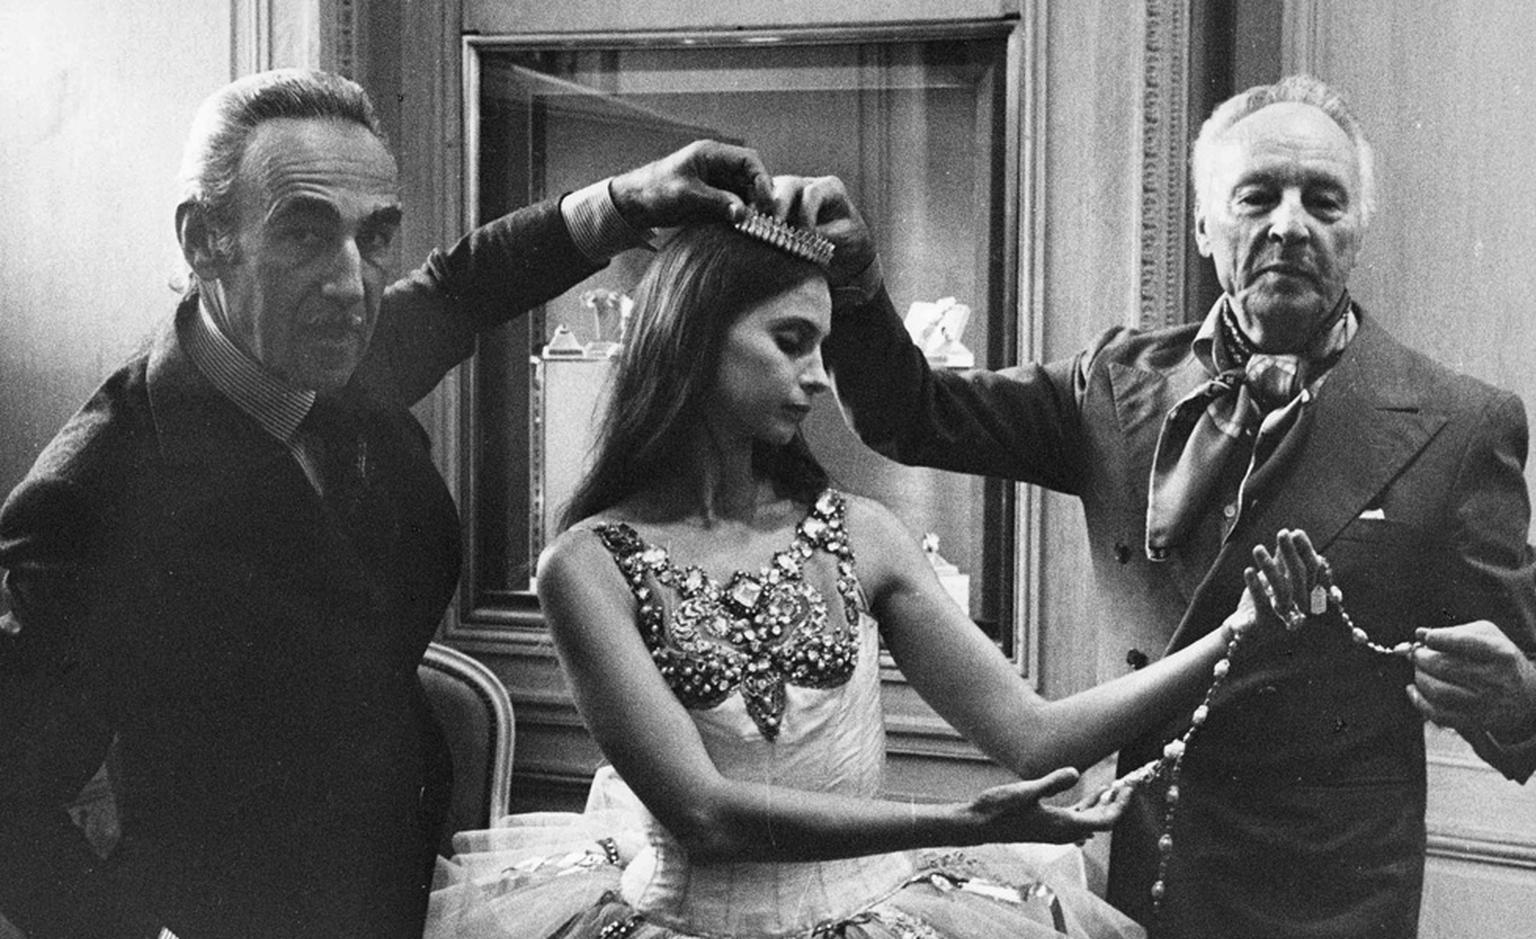 Pierre Arpels, Suzanne Farrell and George Balanchine at Van Cleef & Arpels Place Vendome boutique 1976.